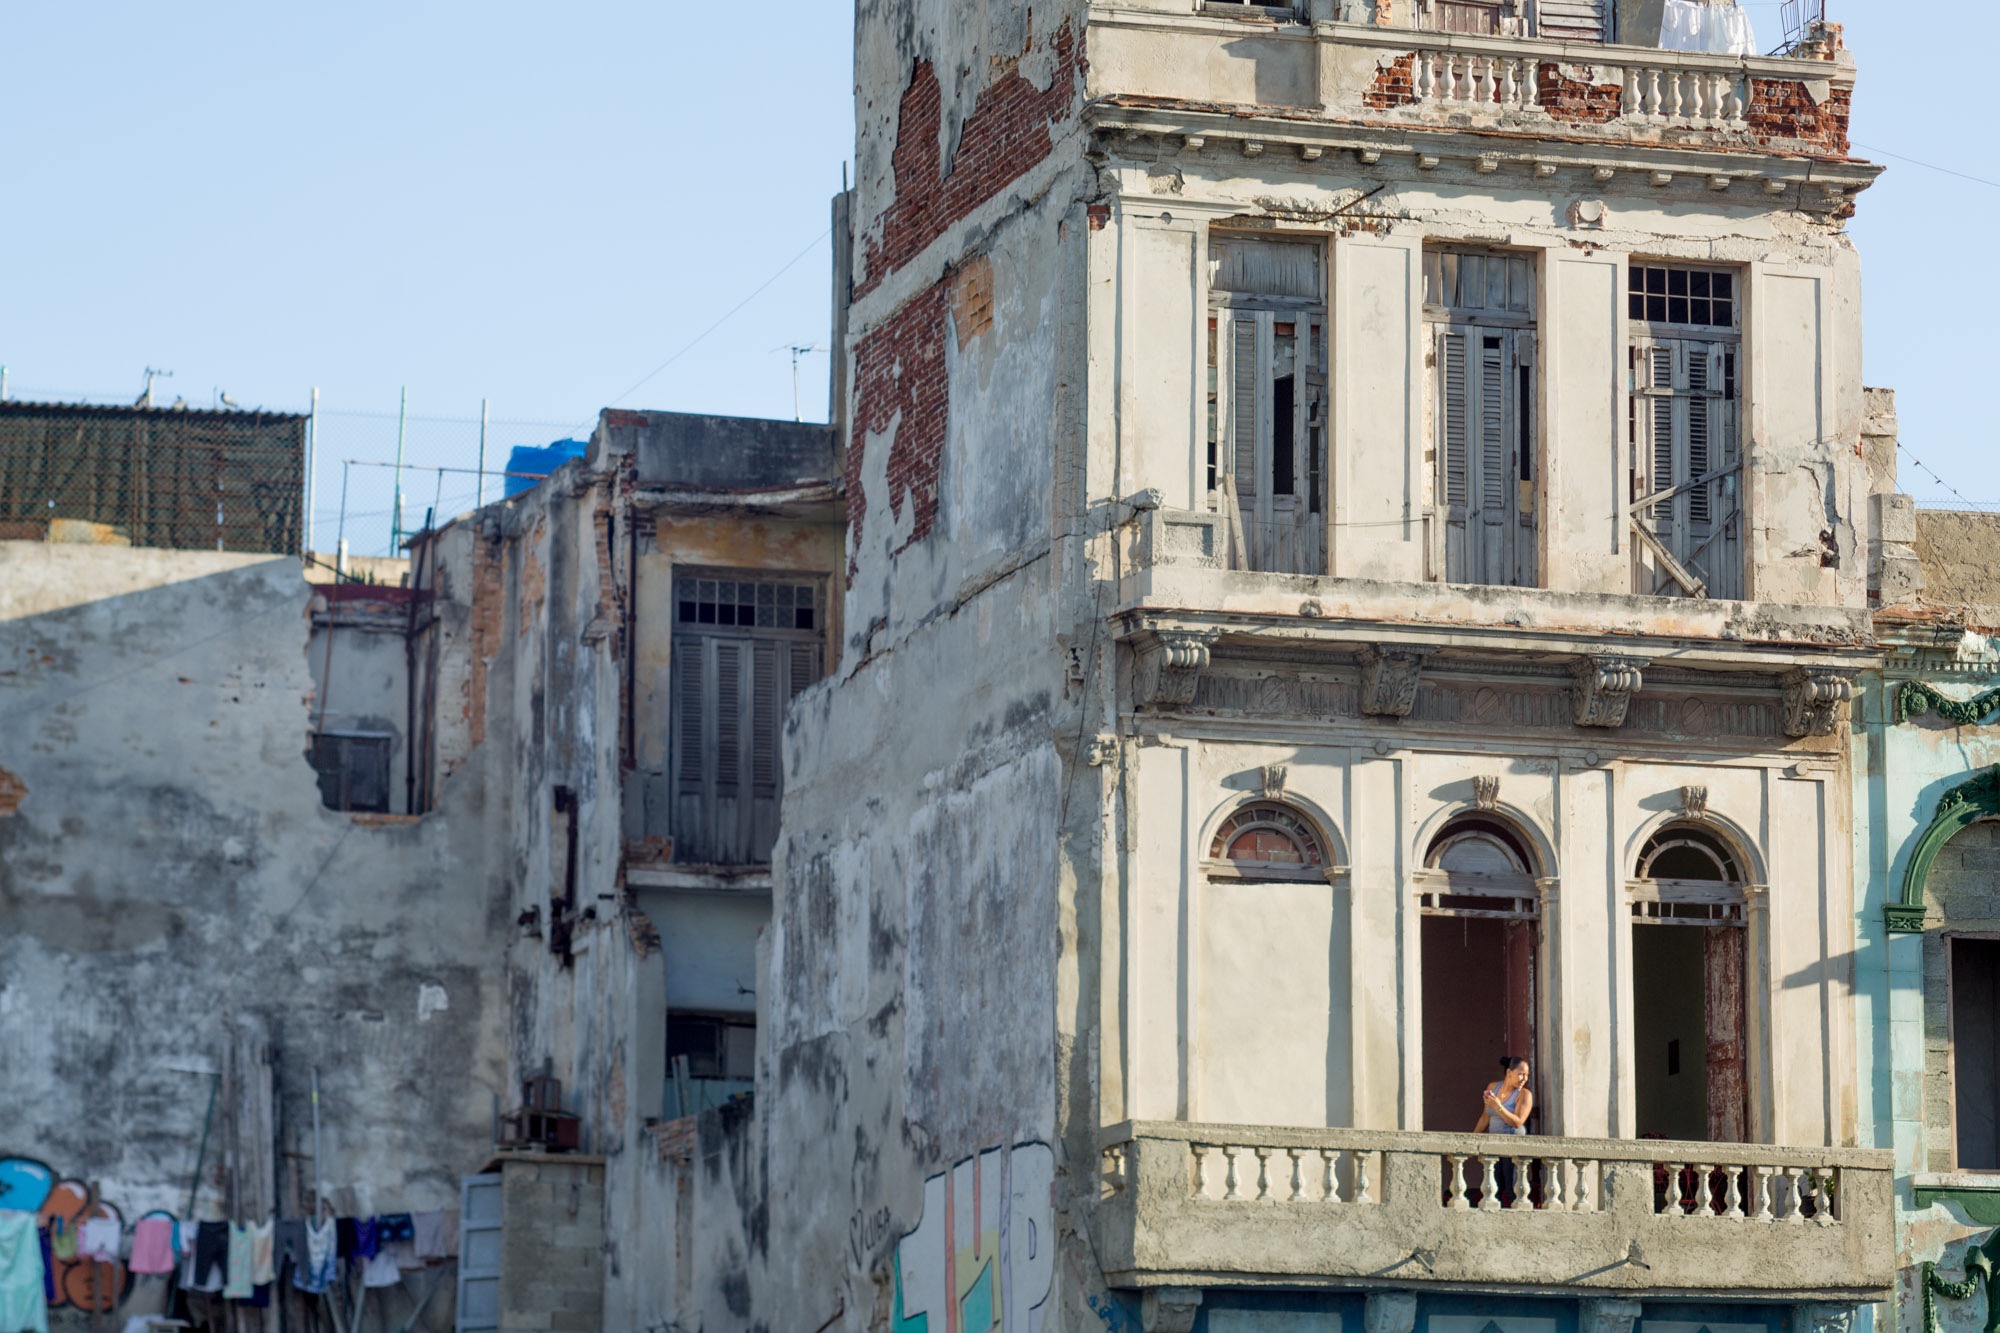 A woman standing in a window of a run down mansion in Havana.